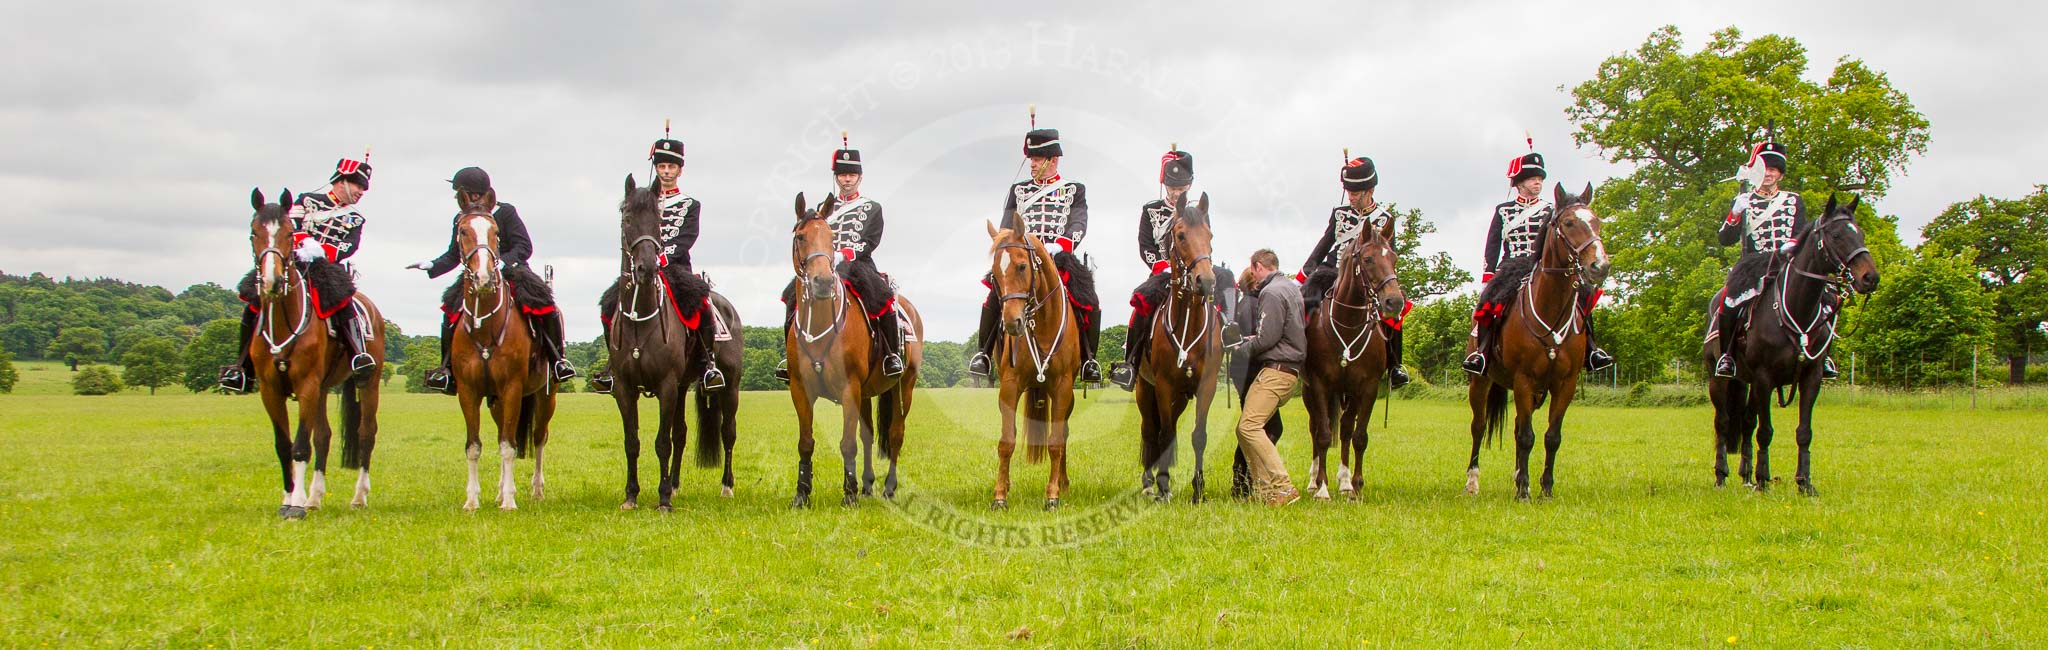 The Light Cavalry HAC Annual Review and Inspection 2013.
Windsor Great Park Review Ground,
Windsor,
Berkshire,
United Kingdom,
on 09 June 2013 at 12:49, image #260